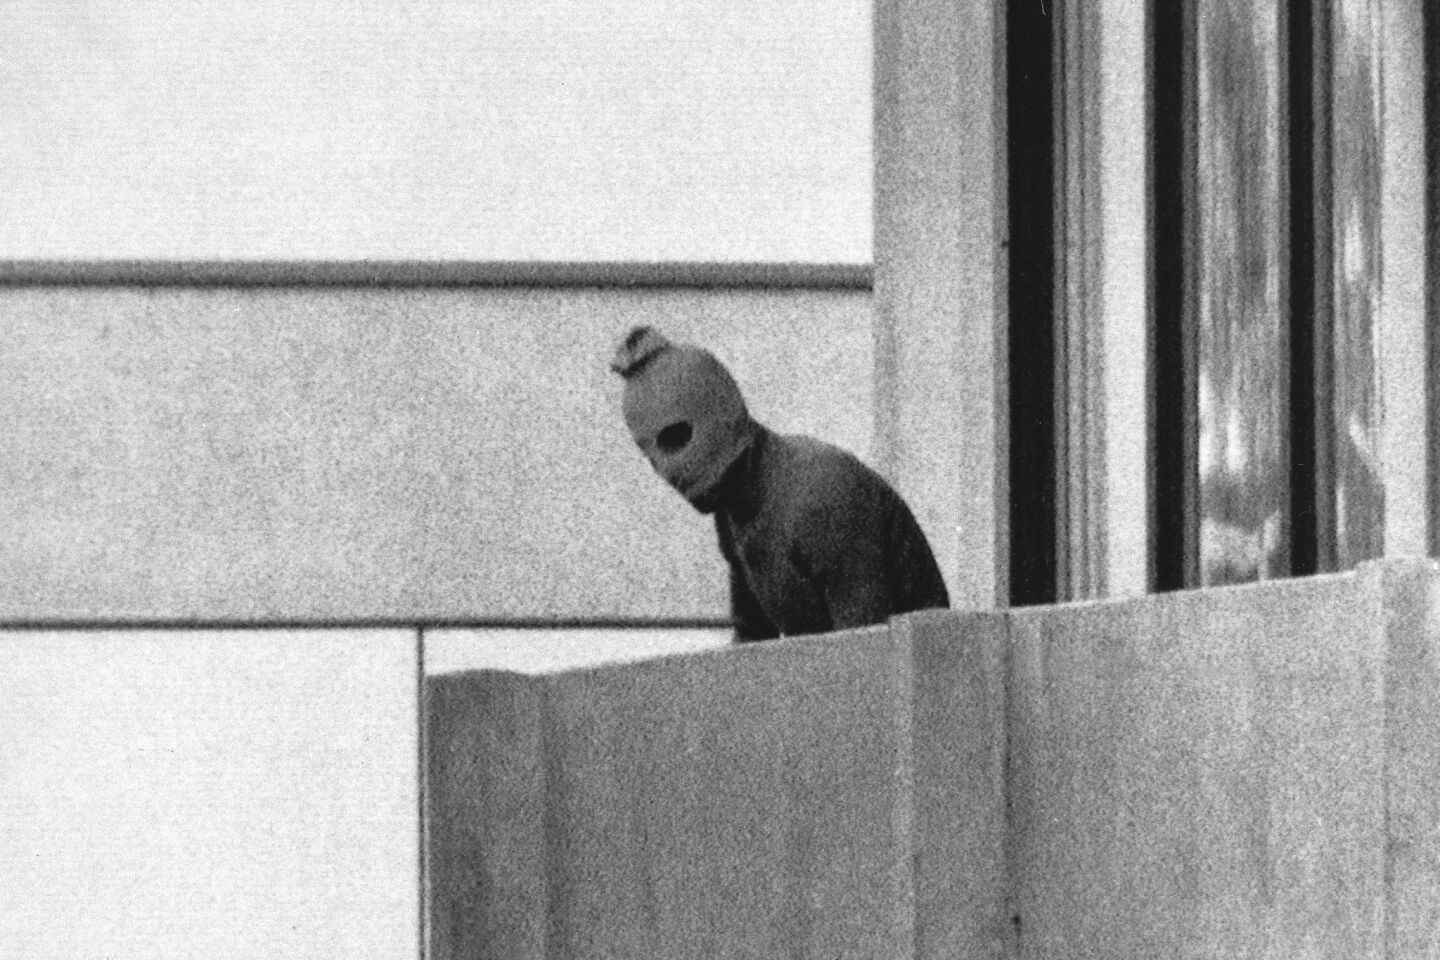 During the 1972 Olympics, eight heavily armed Palestinian terrorists stormed an apartment complex in Olympic Village, killing two Israeli athletes and taking nine others hostage. The terrorists were members of the organization known as Black September. According to the book “Righteous Victims: A History of the Zionist-Arab Conflict 1881-1998,” Ammar Campa-Najjar's grandfather was “head of Fatah’s intelligence arm (which ran Black September).”